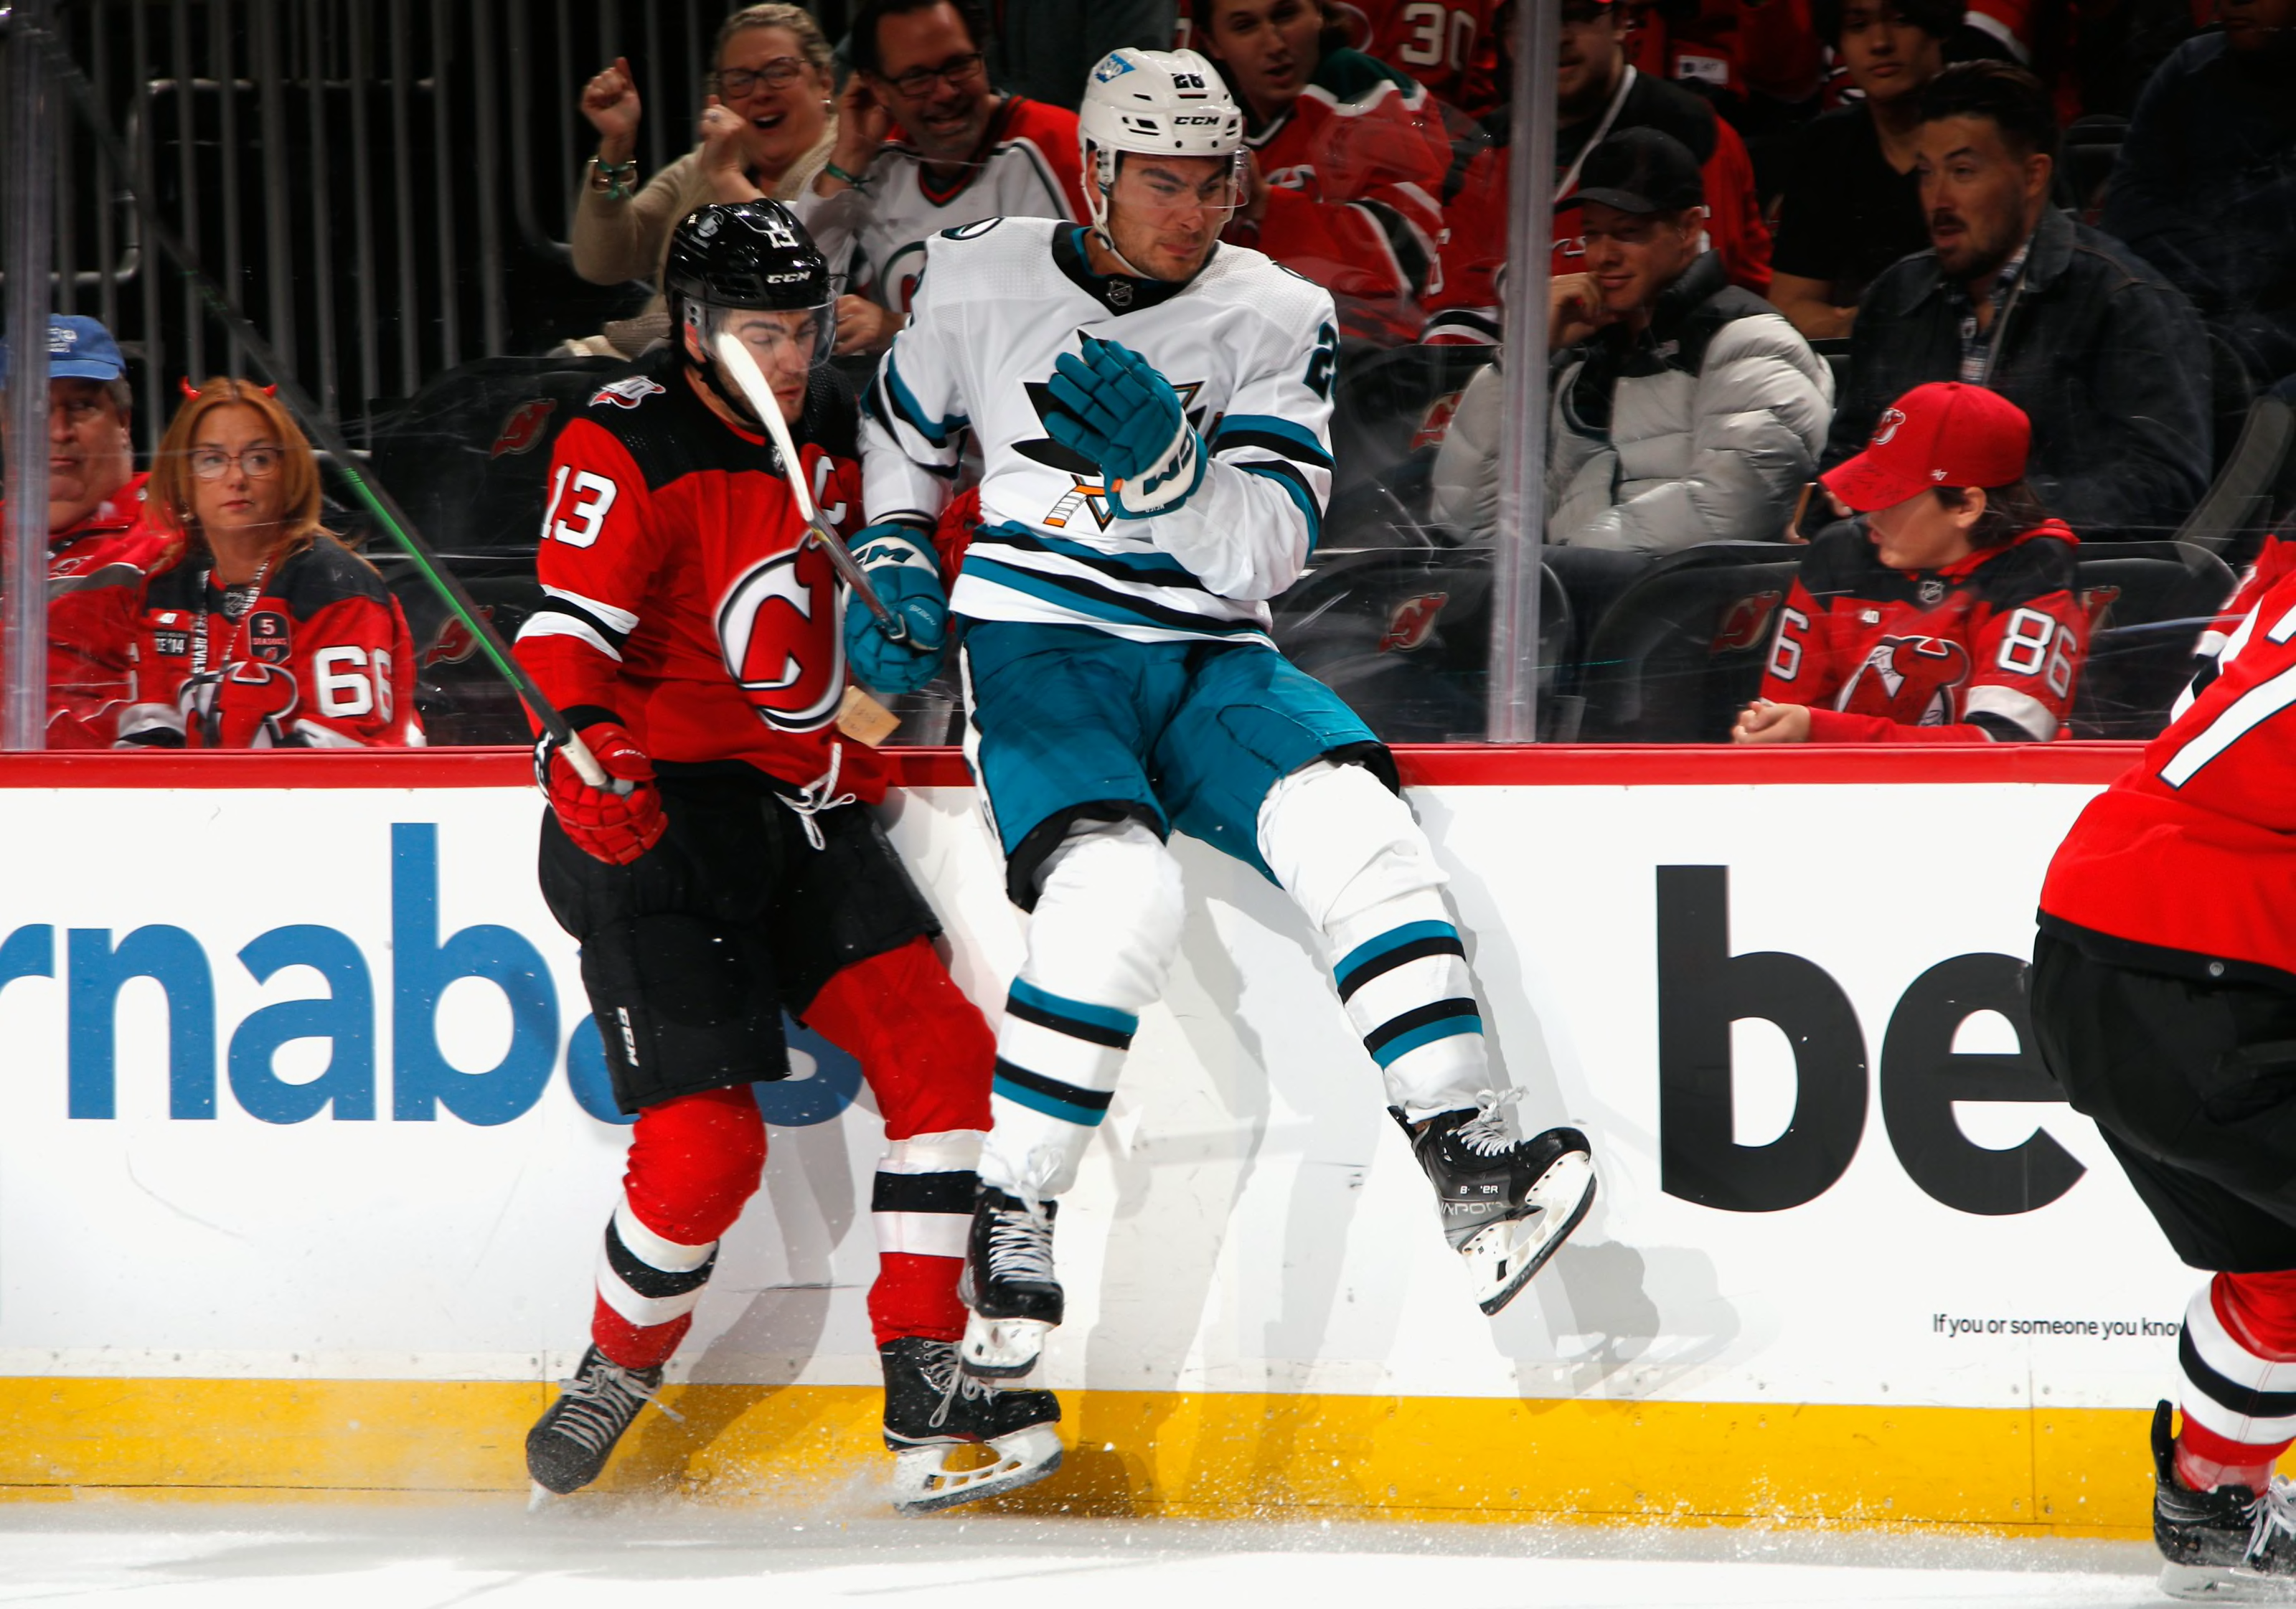 Tickets to Timo Meier's first home game with Devils are still dirt cheap